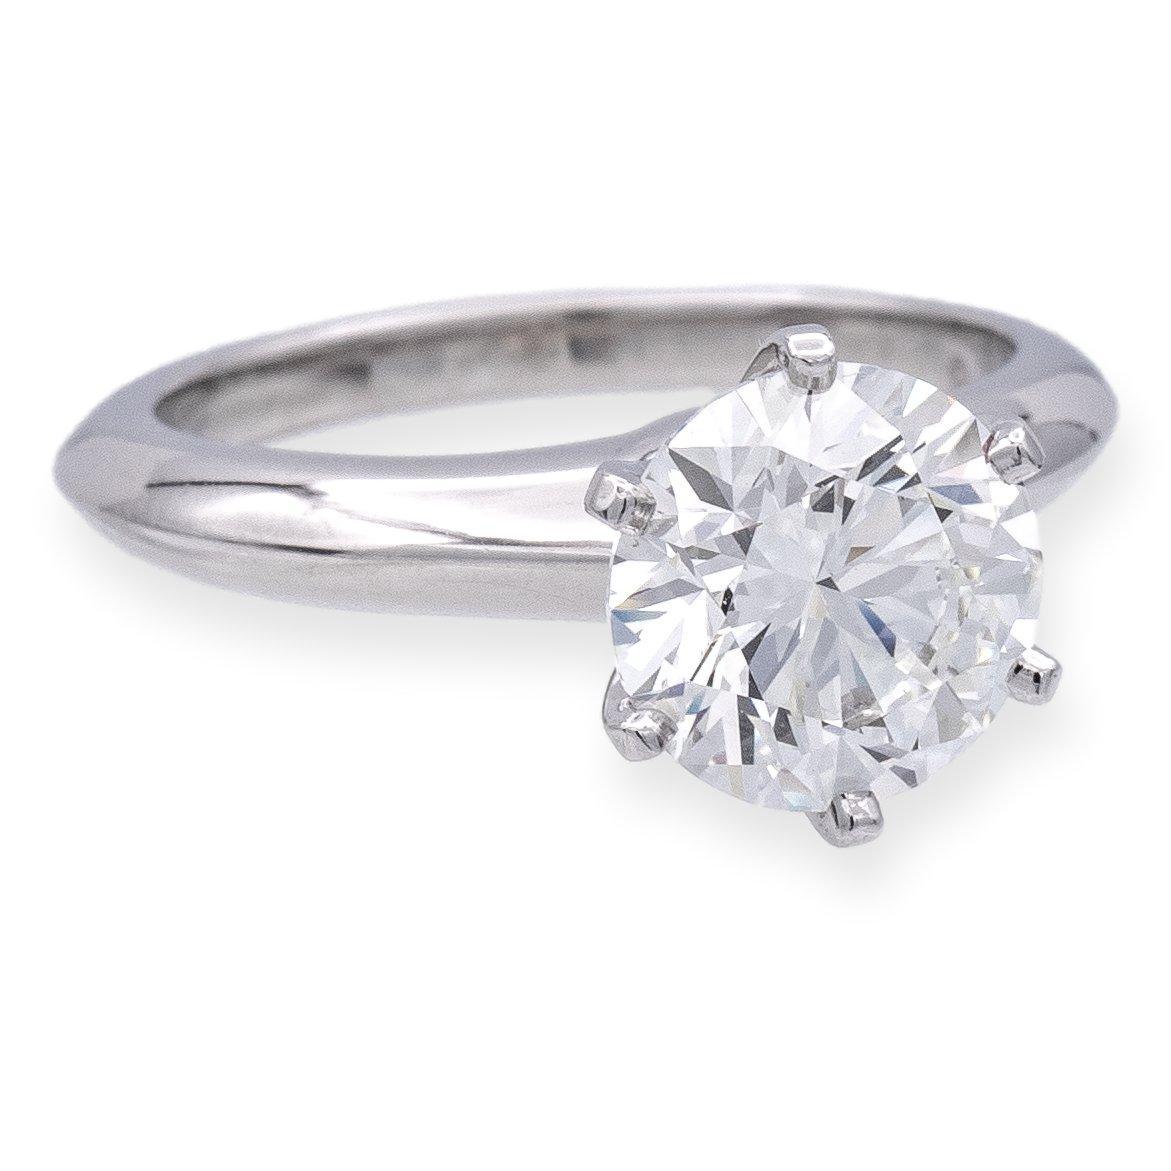 Tiffany & Co. Diamond Engagement ring. Meticulously crafted in a six-prong platinum setting, this exquisite piece showcases a brilliant 2.06 carat center diamond. Graced with an I color and impeccable VS1 clarity, its radiance is enhanced by its